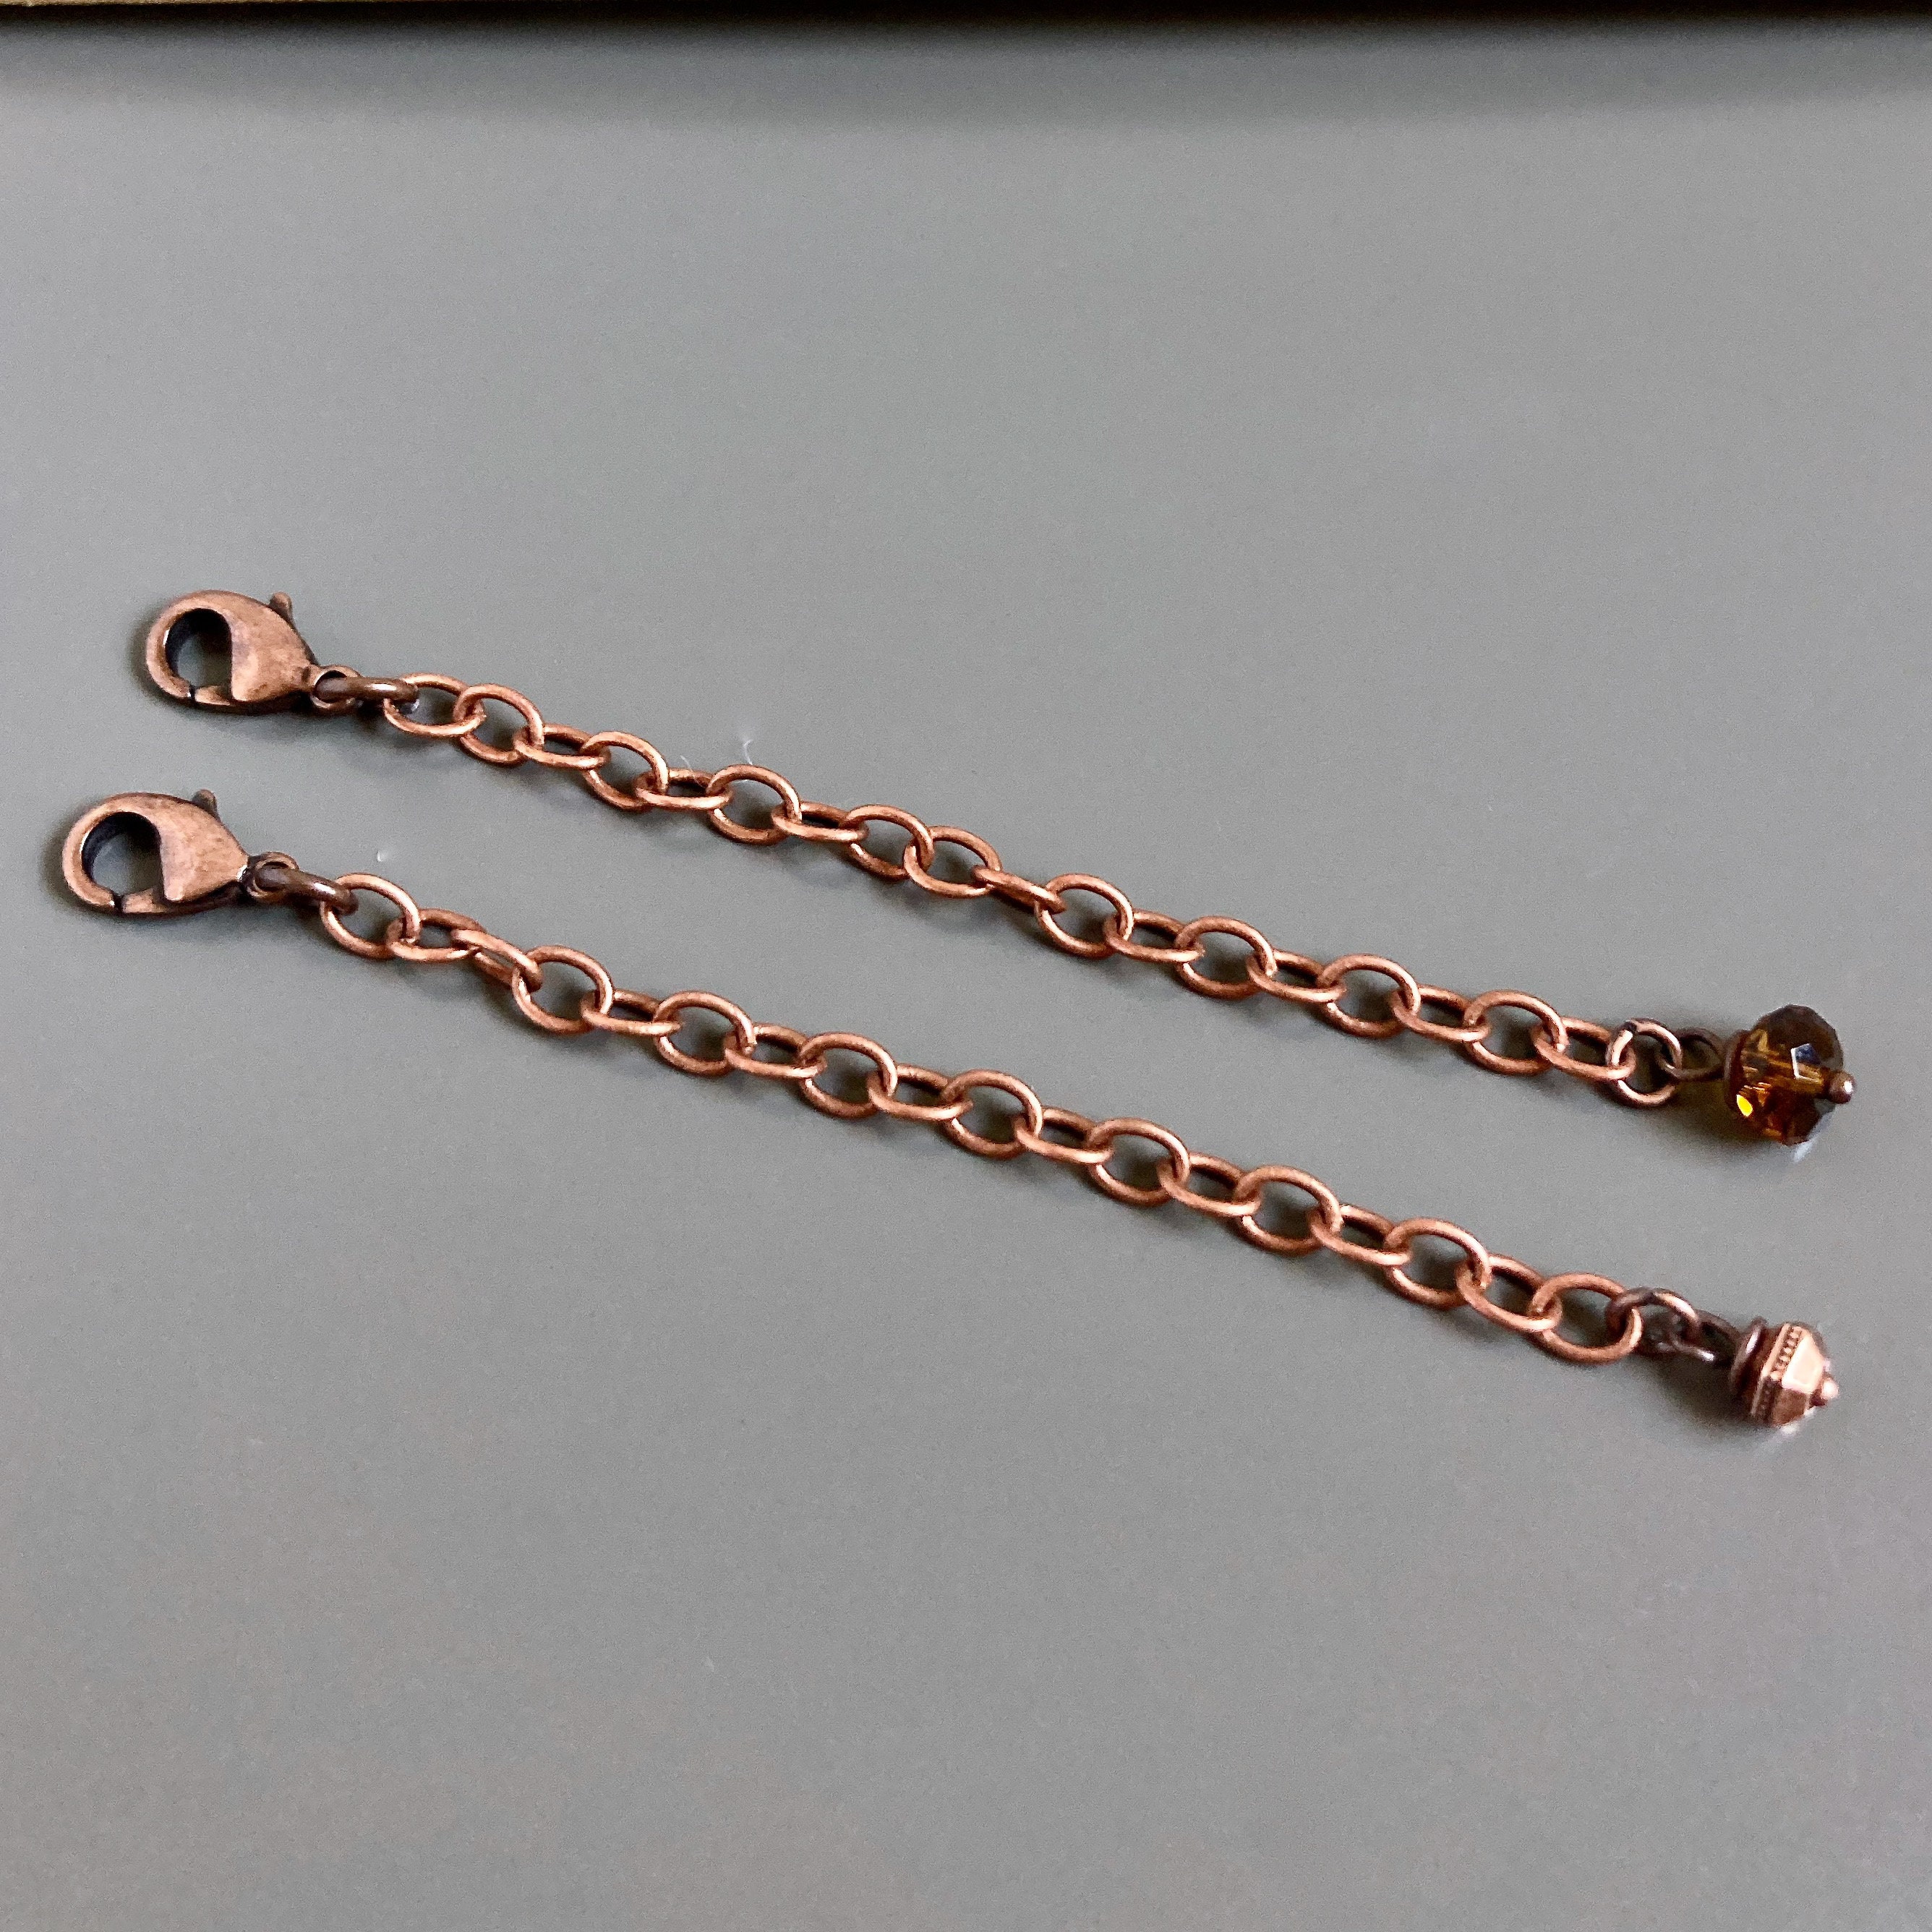  Chain Extenders for Necklaces, Anezus 10pcs Gold